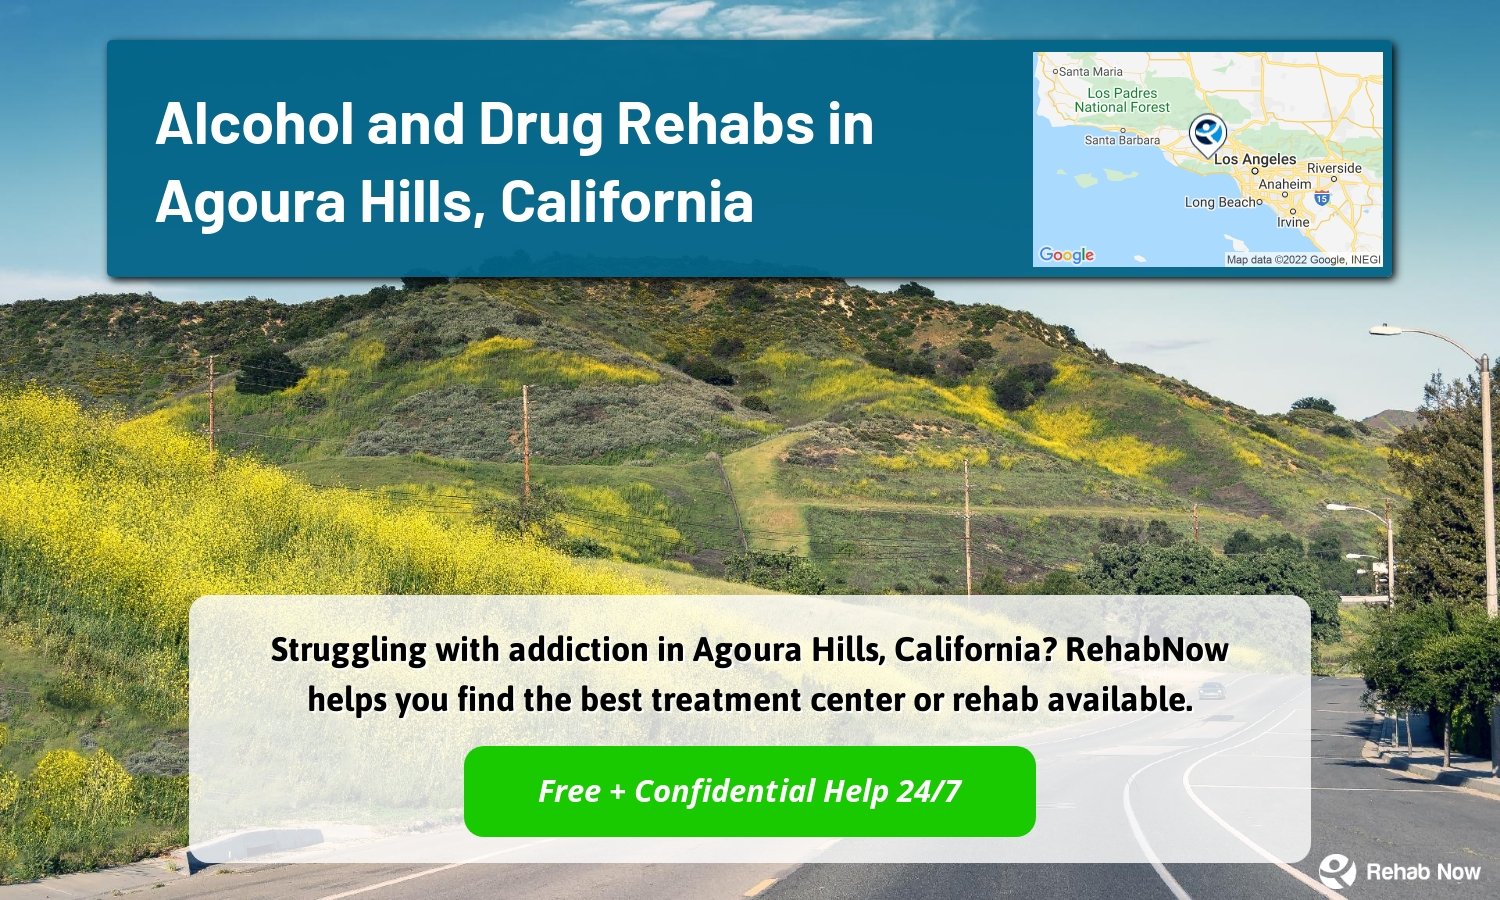 Struggling with addiction in Agoura Hills, California? RehabNow helps you find the best treatment center or rehab available.